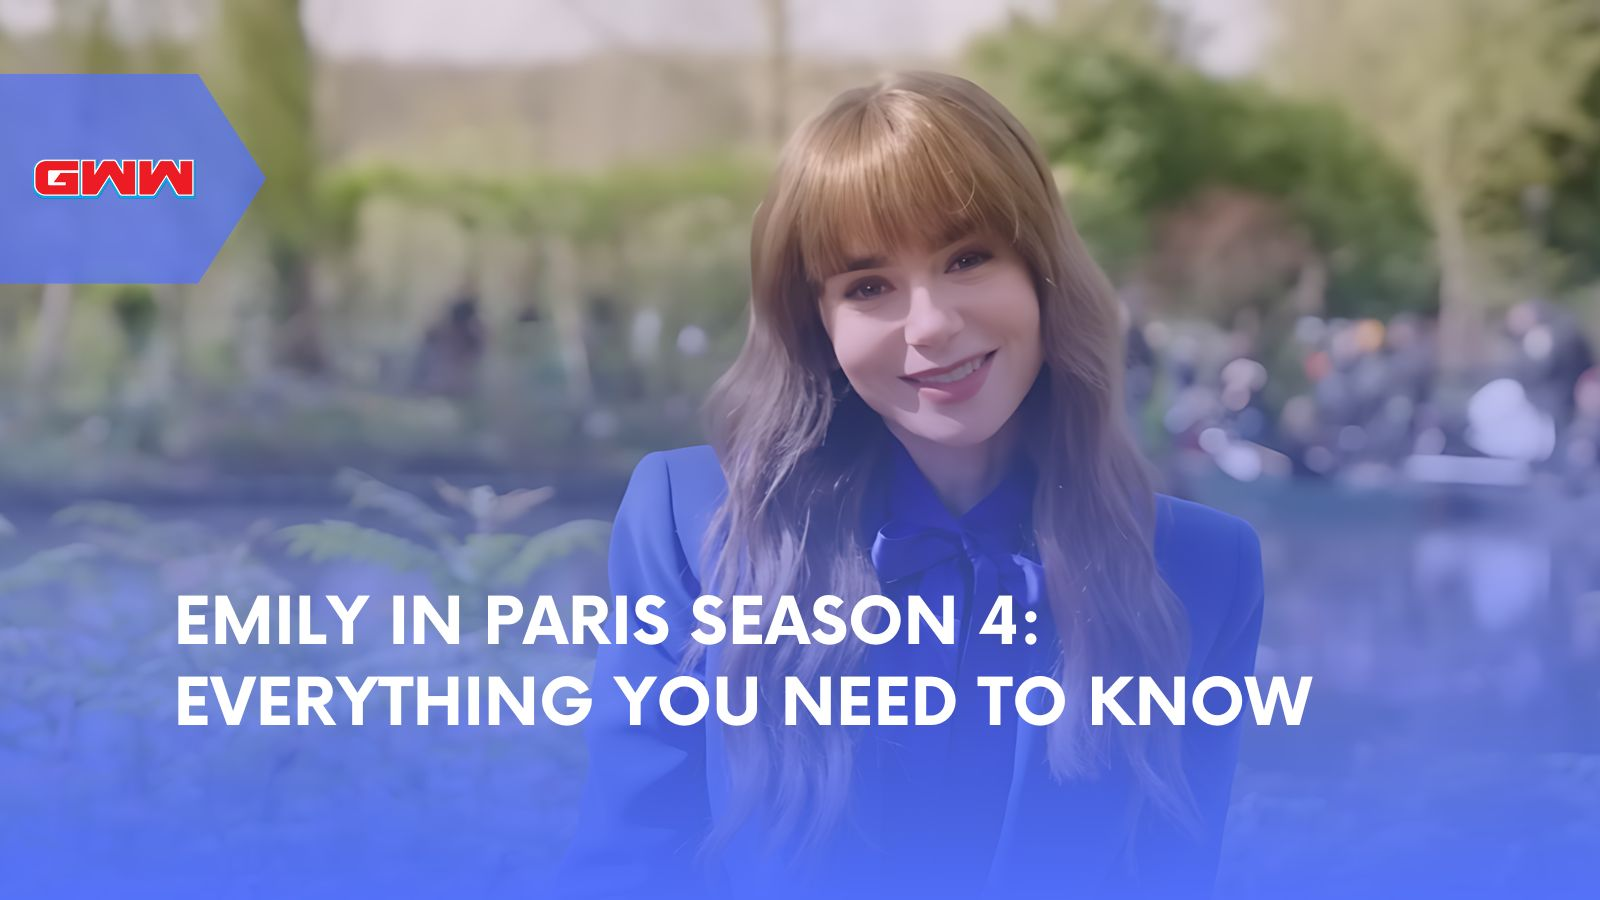 Emily in Paris Season 4: Everything You Need to Know